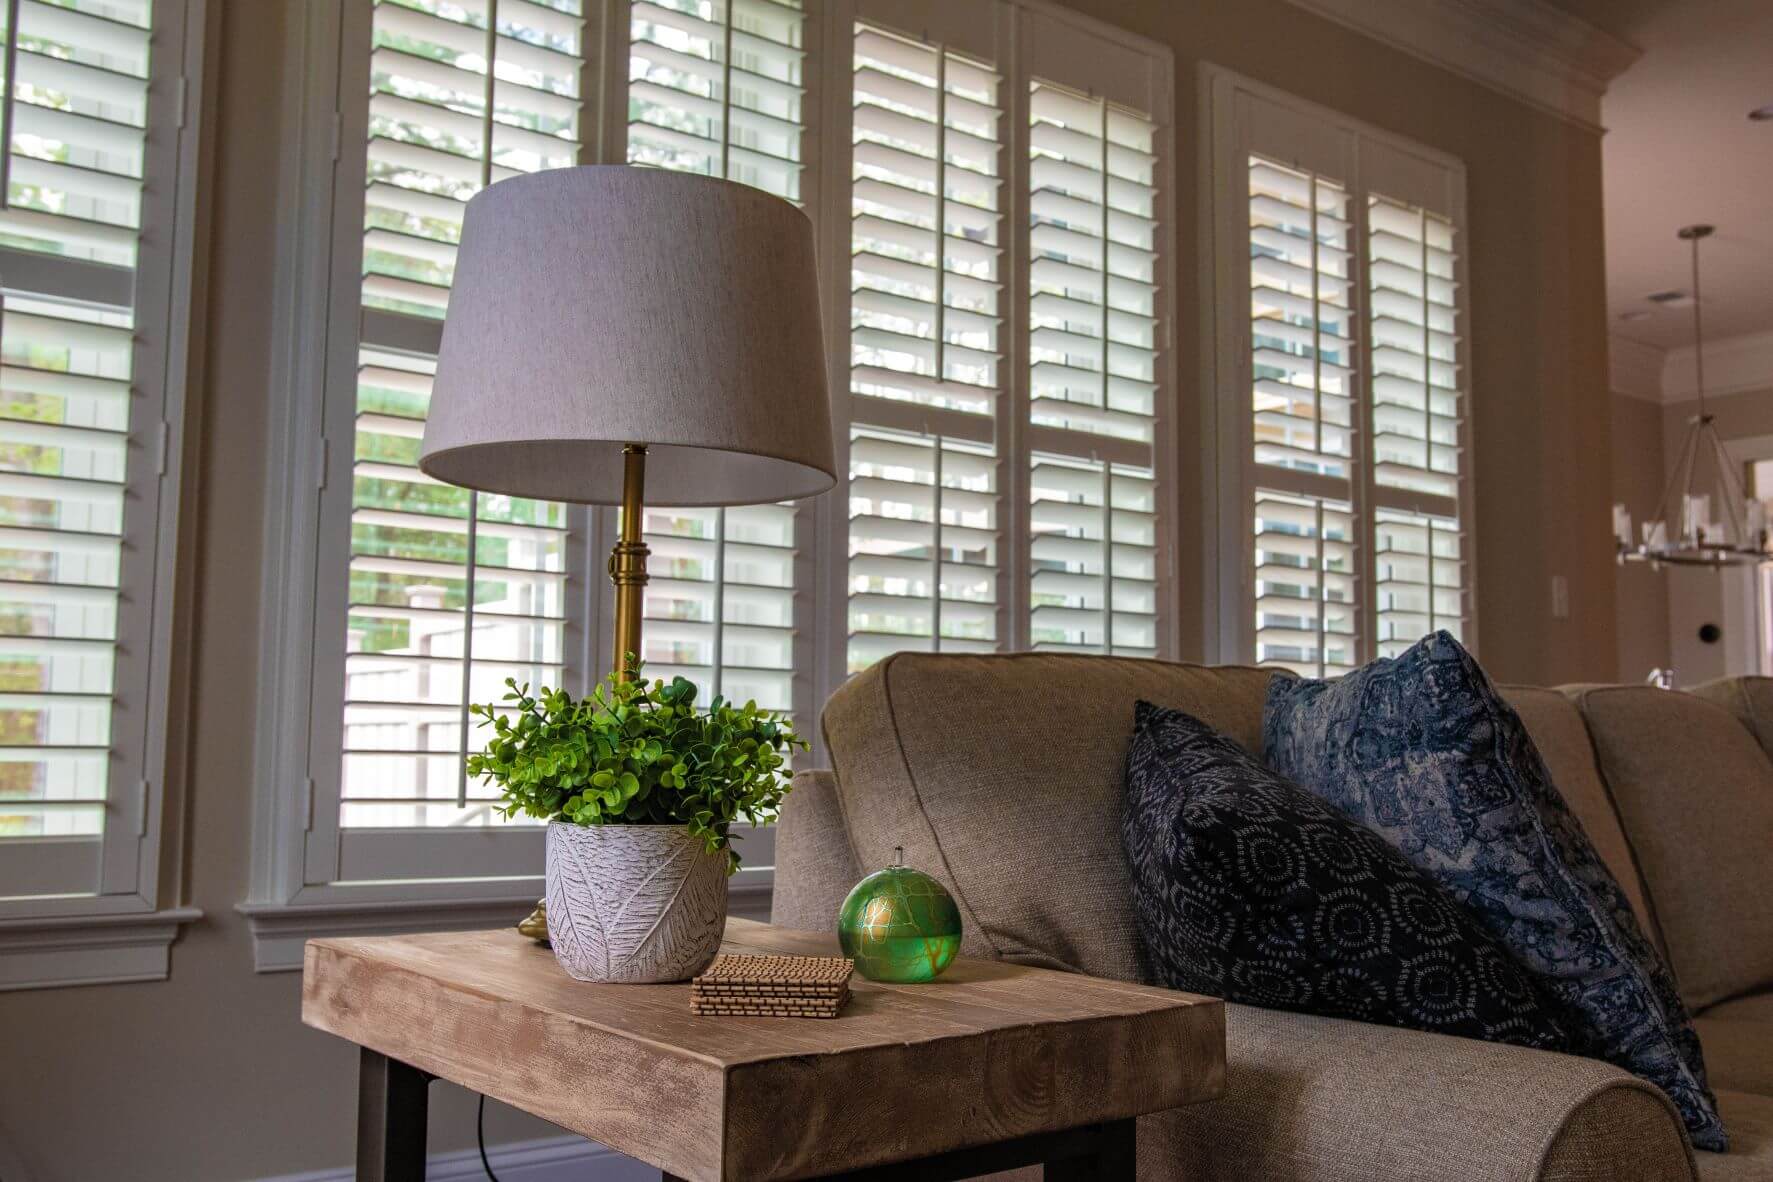 Custom Window Shades, Blinds, Drapes, and Shutters